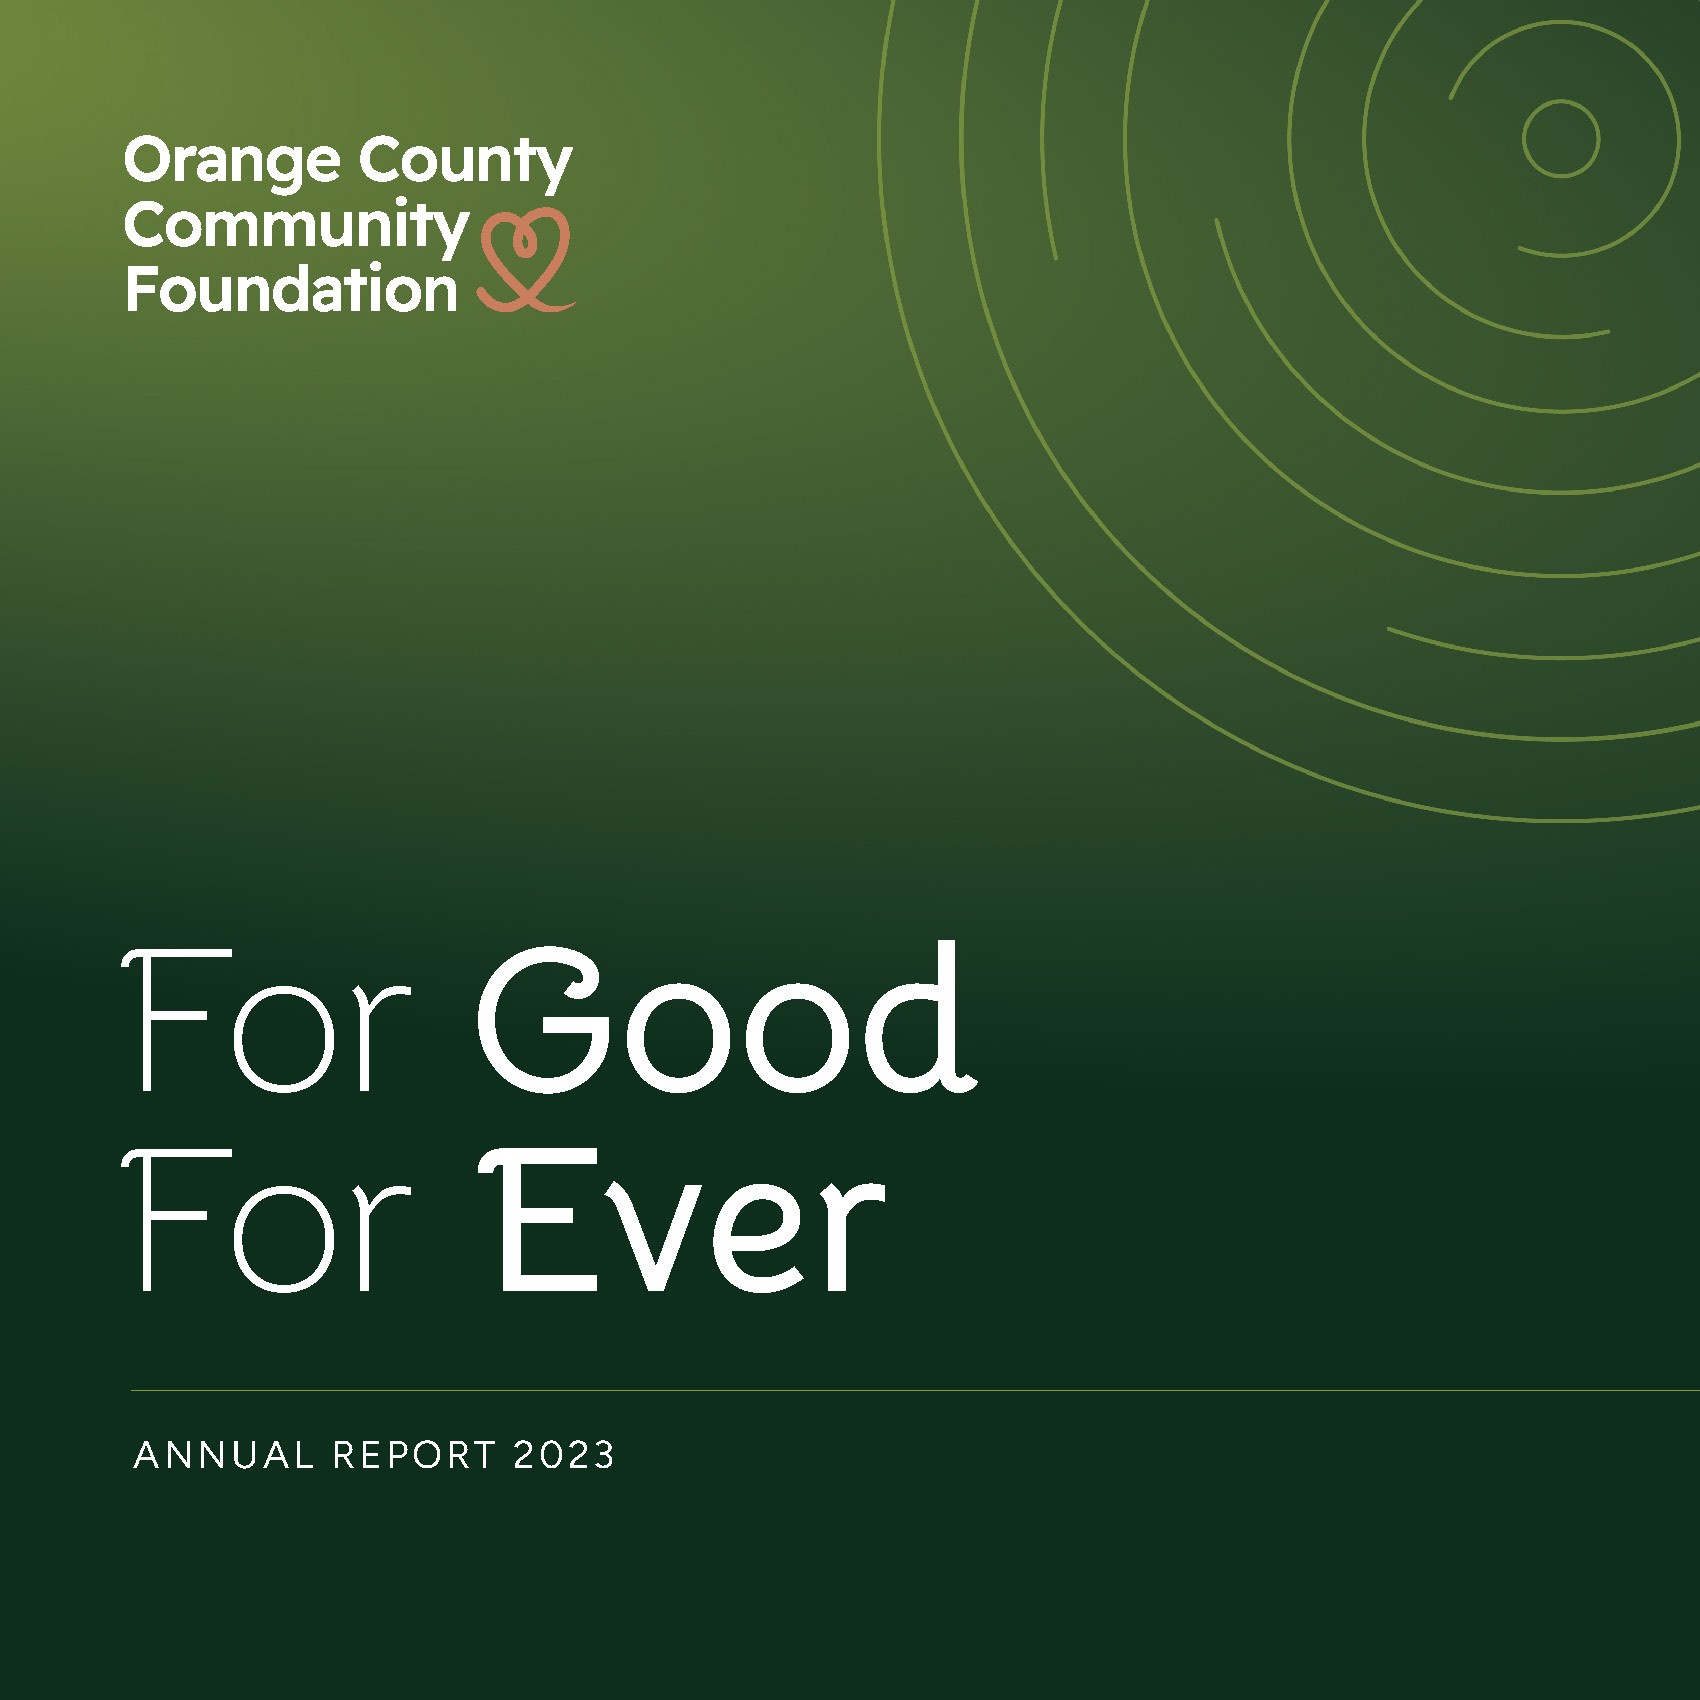 OCCF Annual Report 2023 – For Good. For Ever.